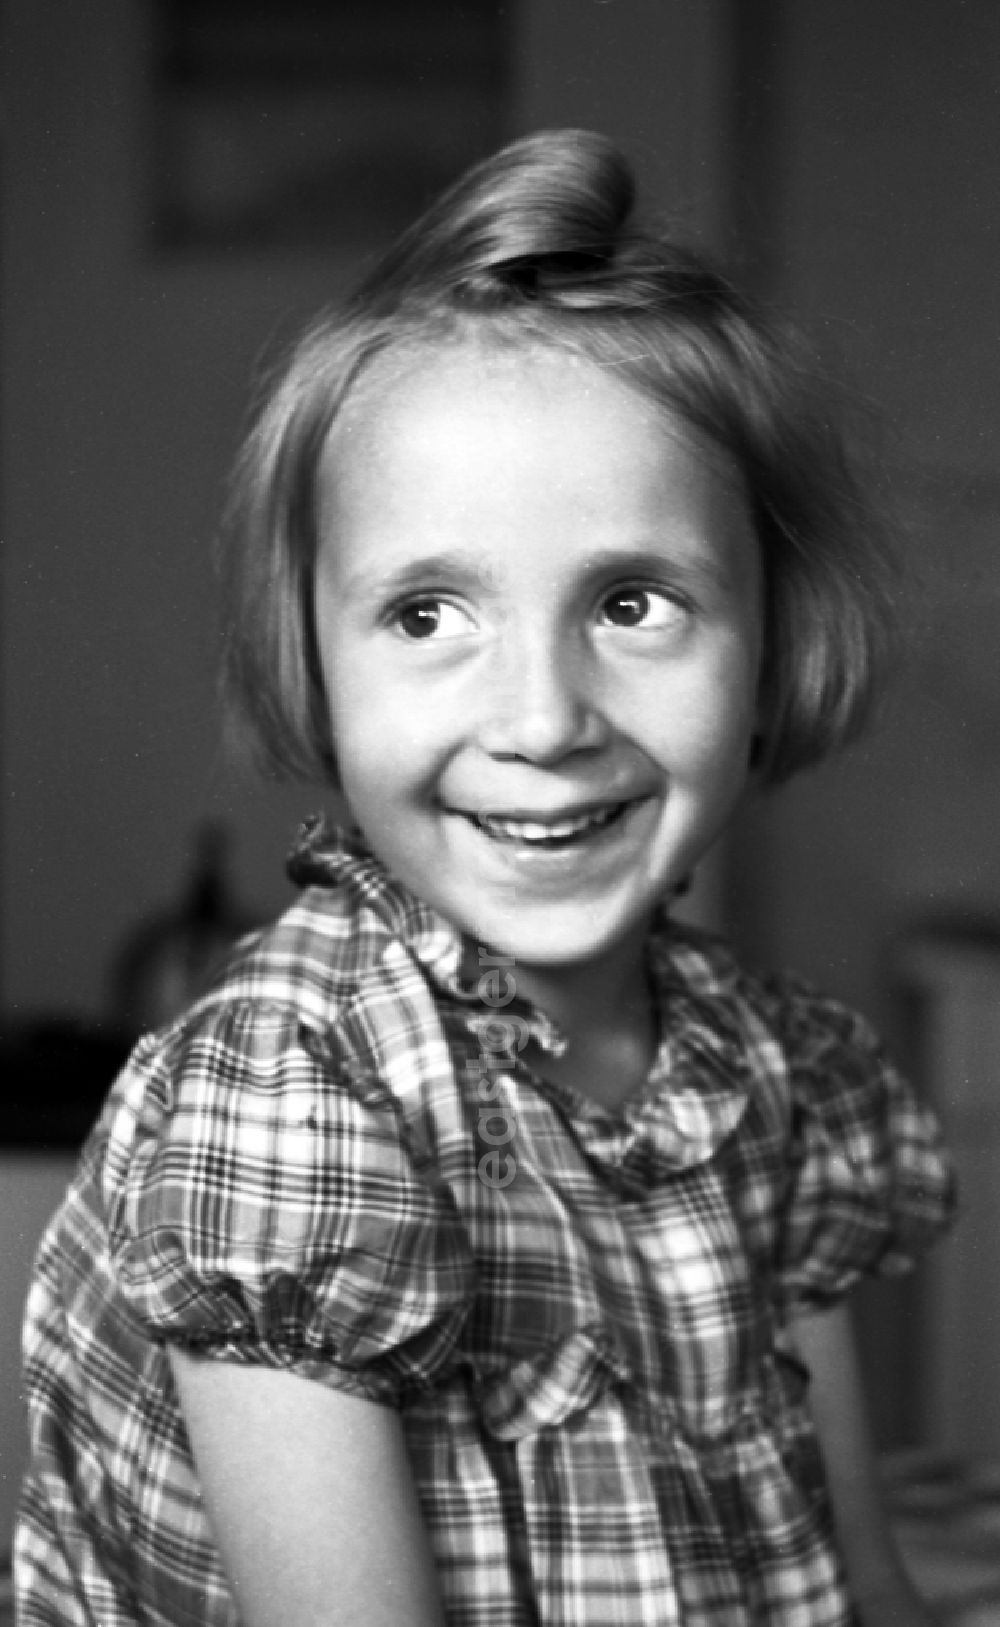 GDR picture archive: Merseburg - Little girl in the portrait in Merseburg in the federal state Saxony-Anhalt in Germany